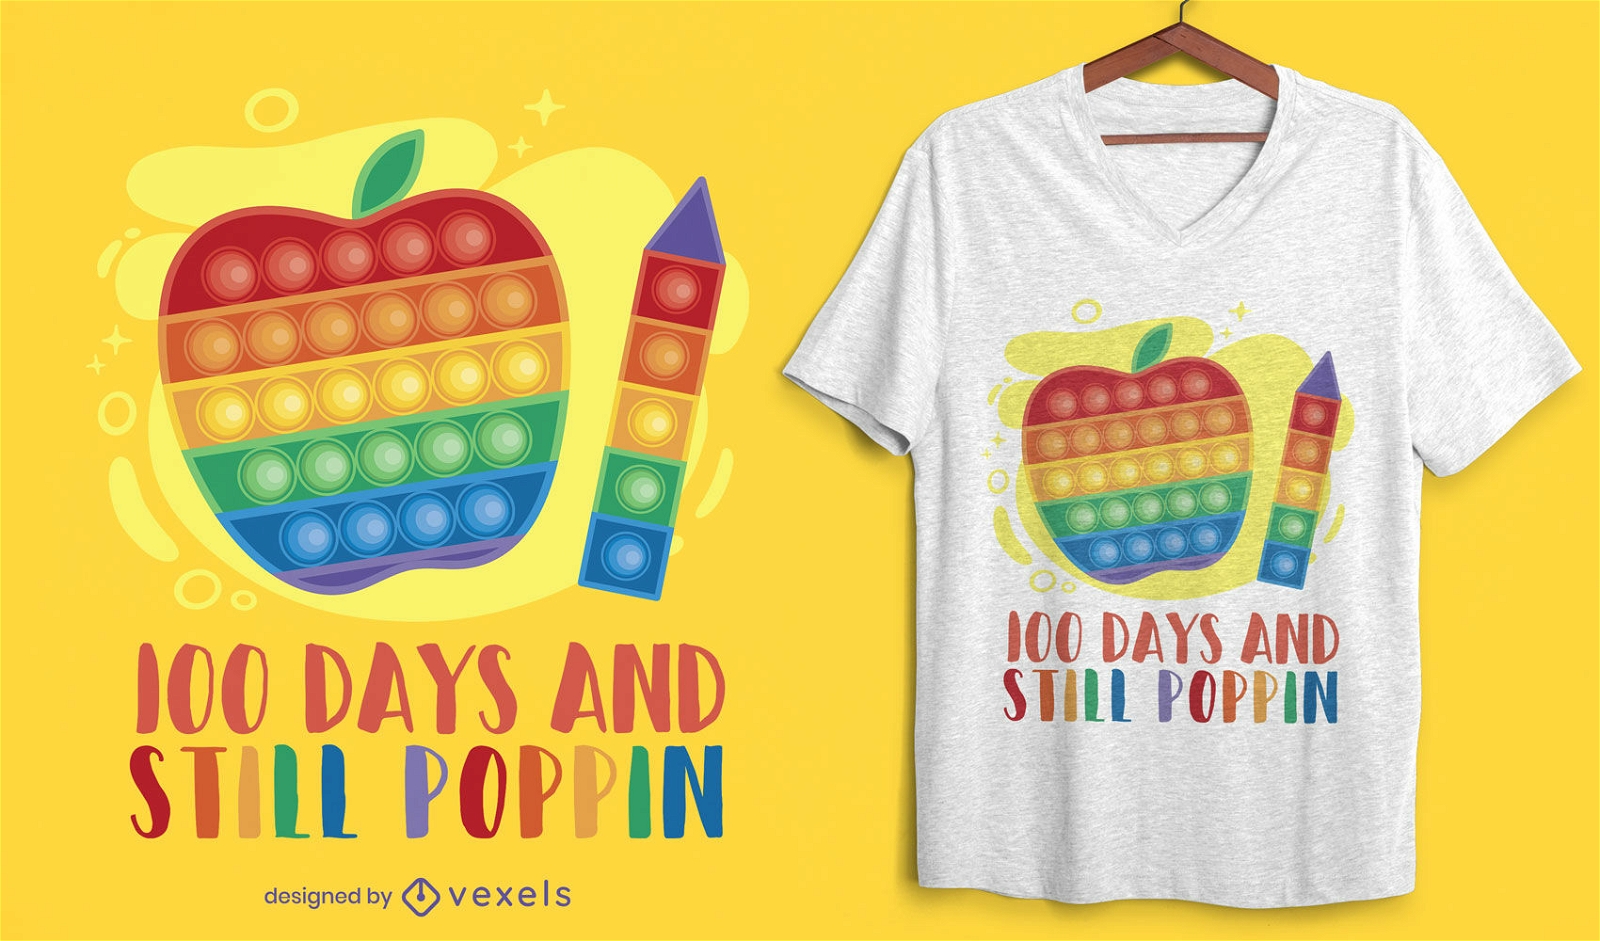 100 Tage Schule Poppin T-Shirt Design